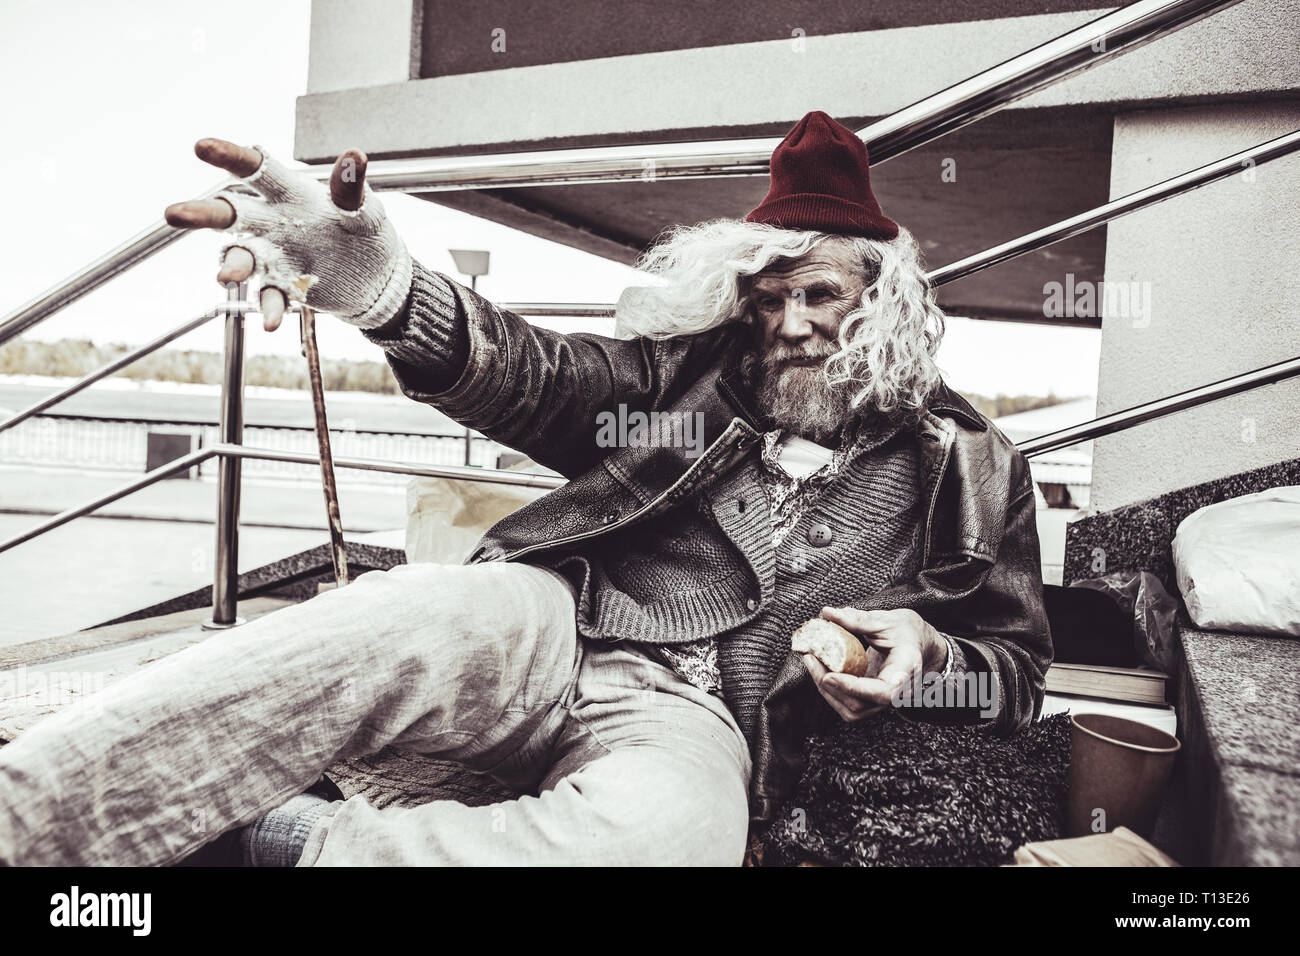 Drunk homeless man swearing at pedestrians while stretching. Stock Photo